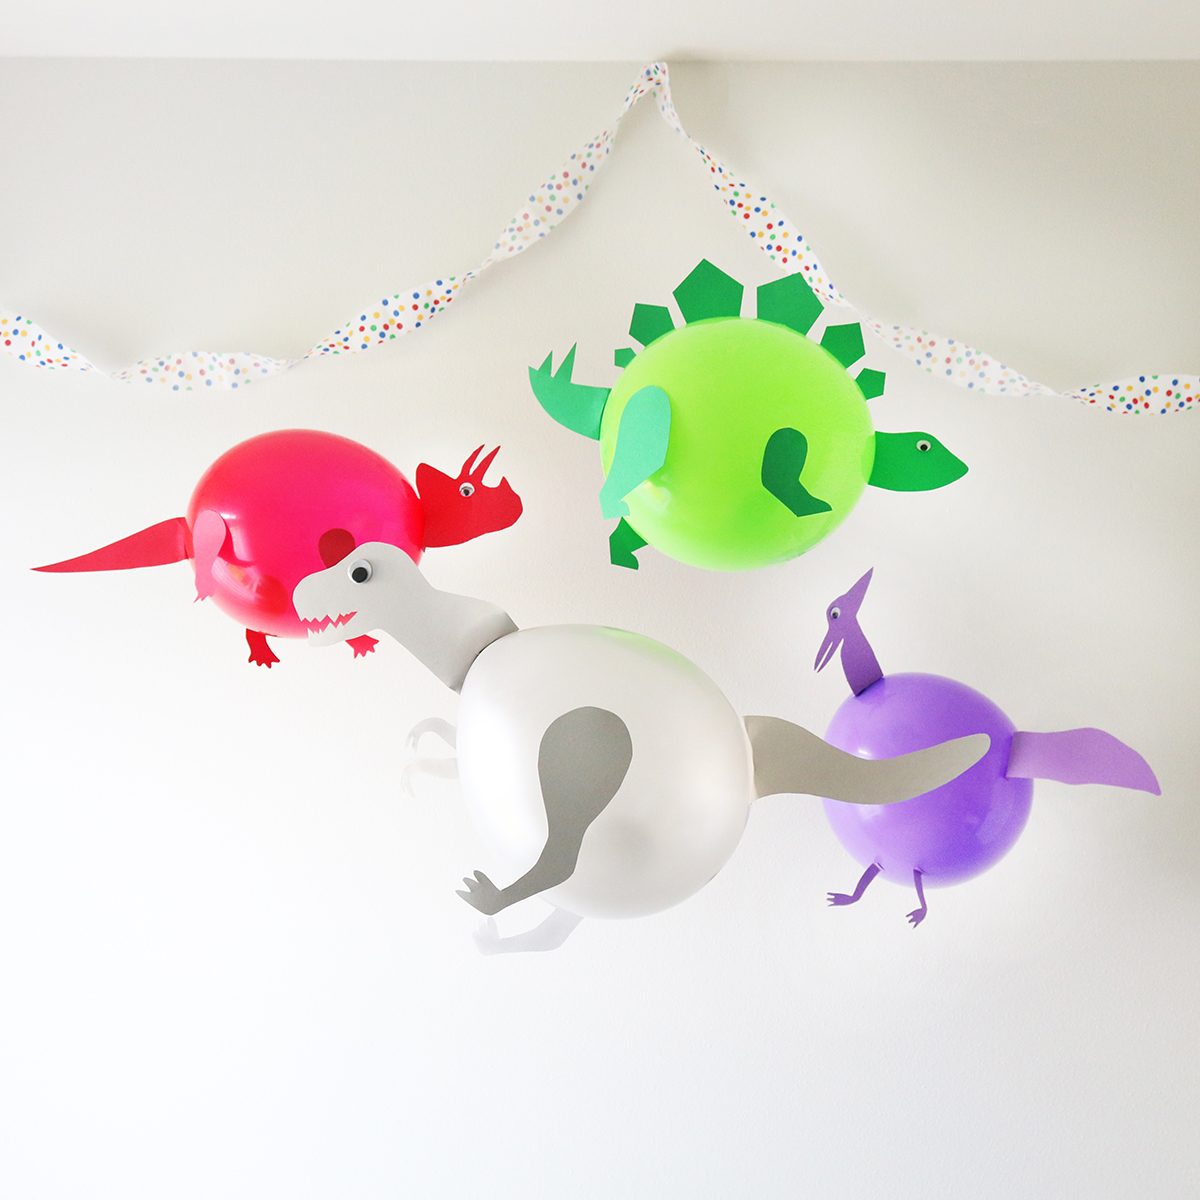 Craft Set Fun Dinosaurs Masks Party Happy Balloons Creative Make a Toy yourself 